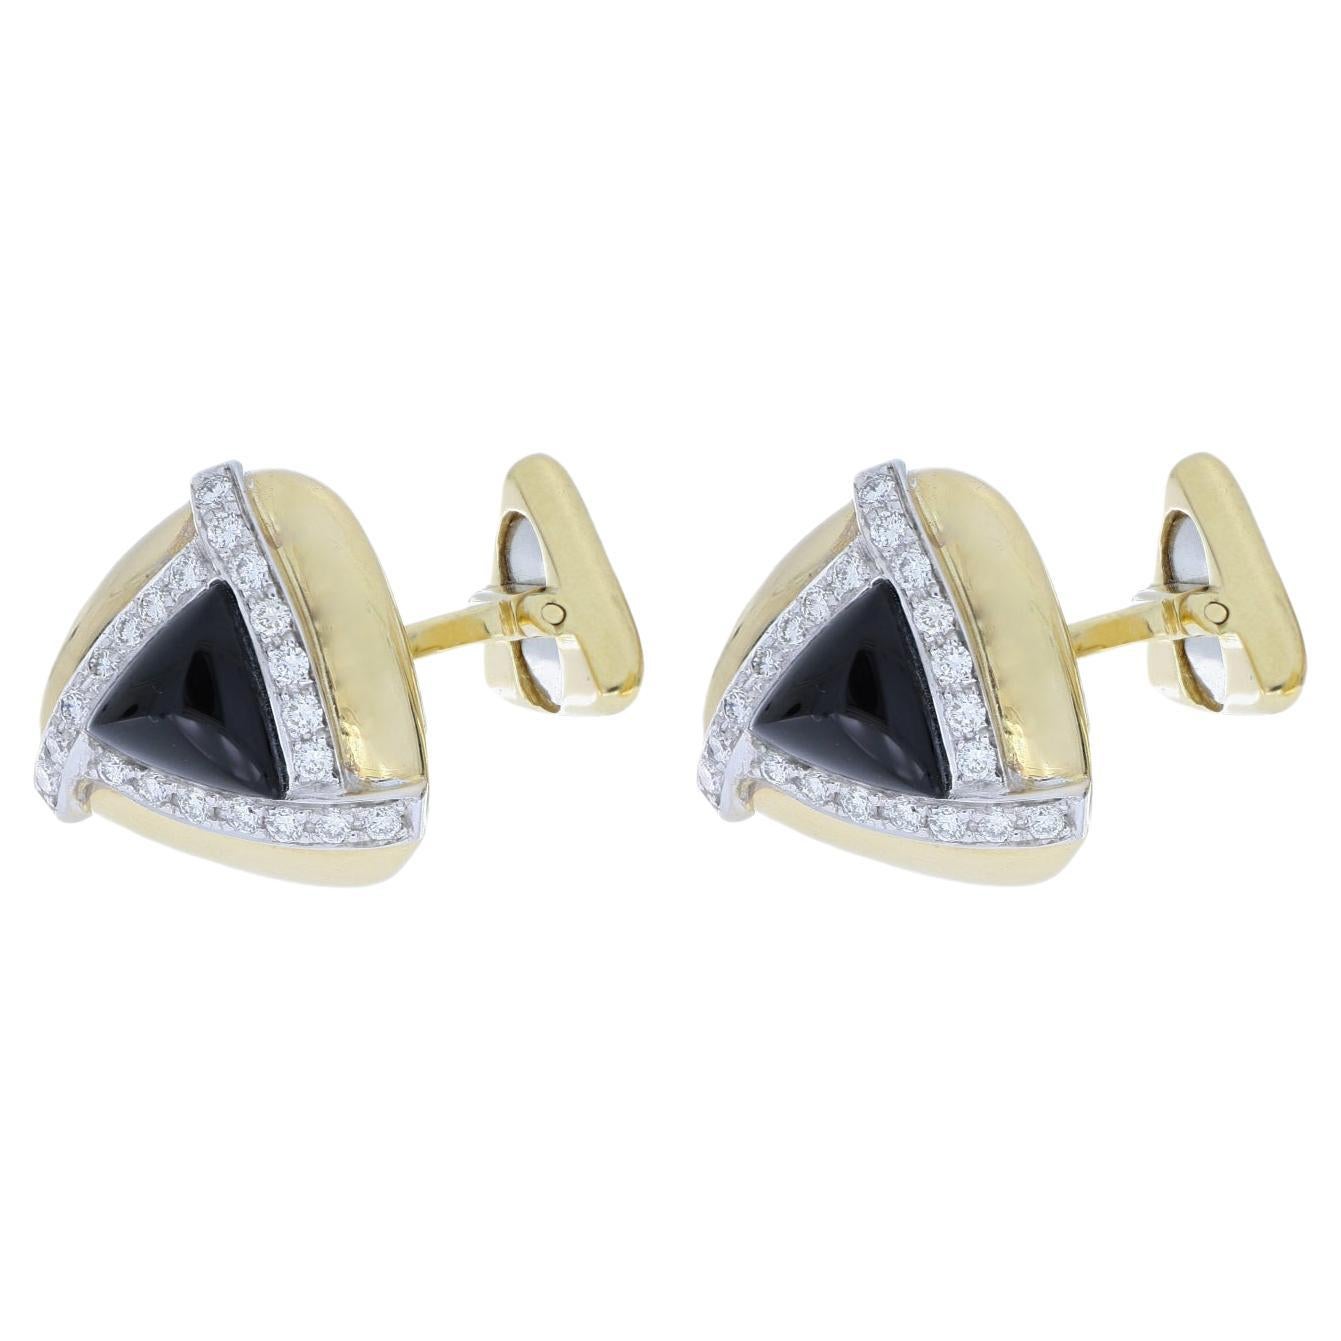 Man's Onyx and White Diamonds Wedding Cufflinks in 18 K Yellow Gold For Sale